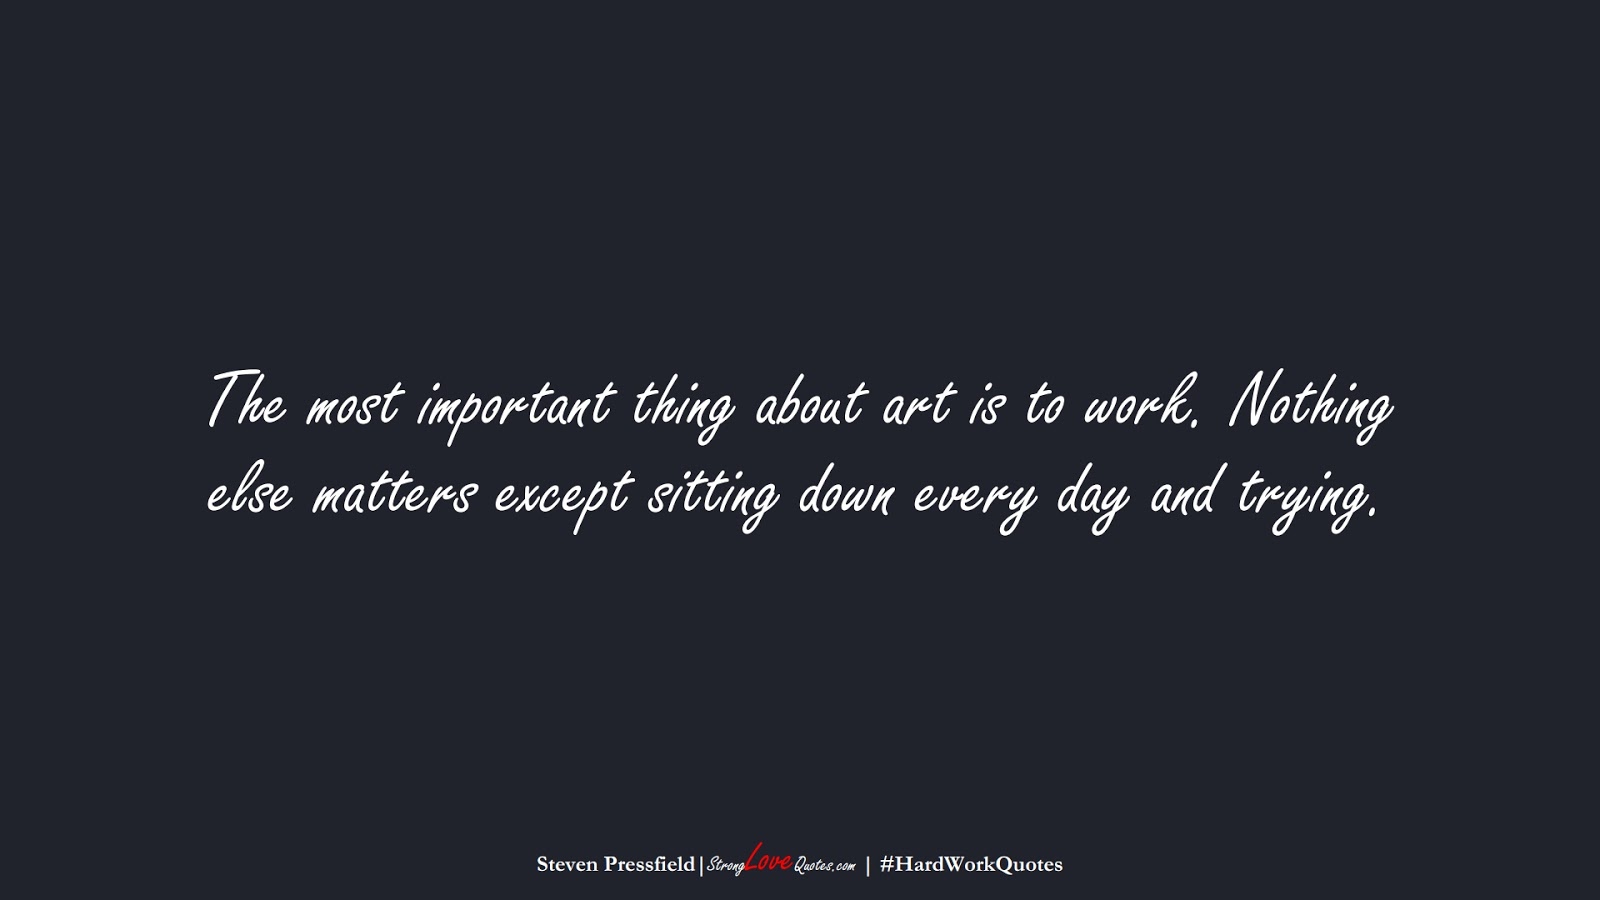 The most important thing about art is to work. Nothing else matters except sitting down every day and trying. (Steven Pressfield);  #HardWorkQuotes